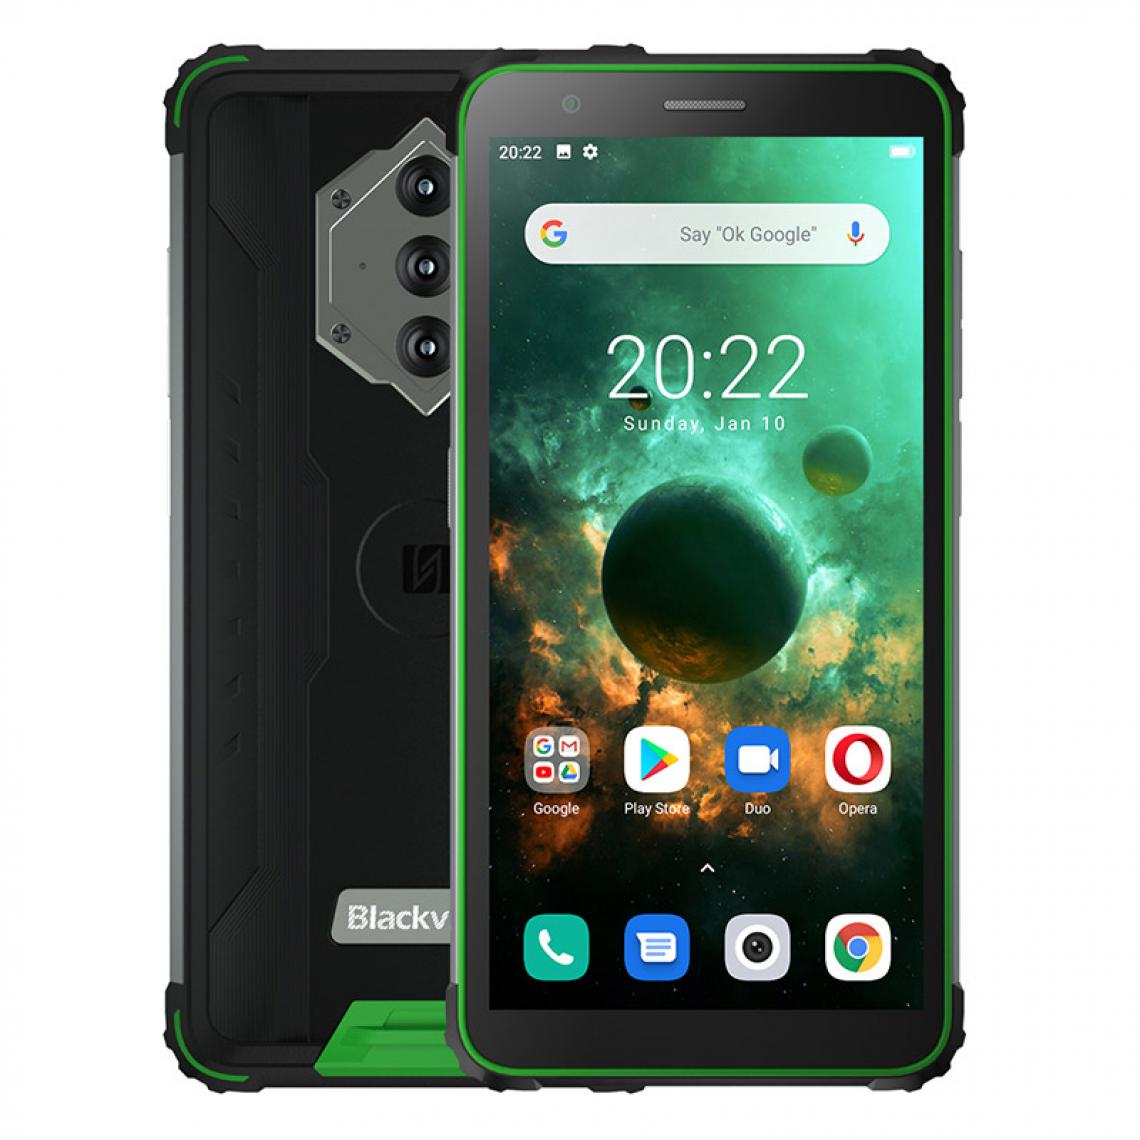 Blackview - BV6600 - Smartphone Android